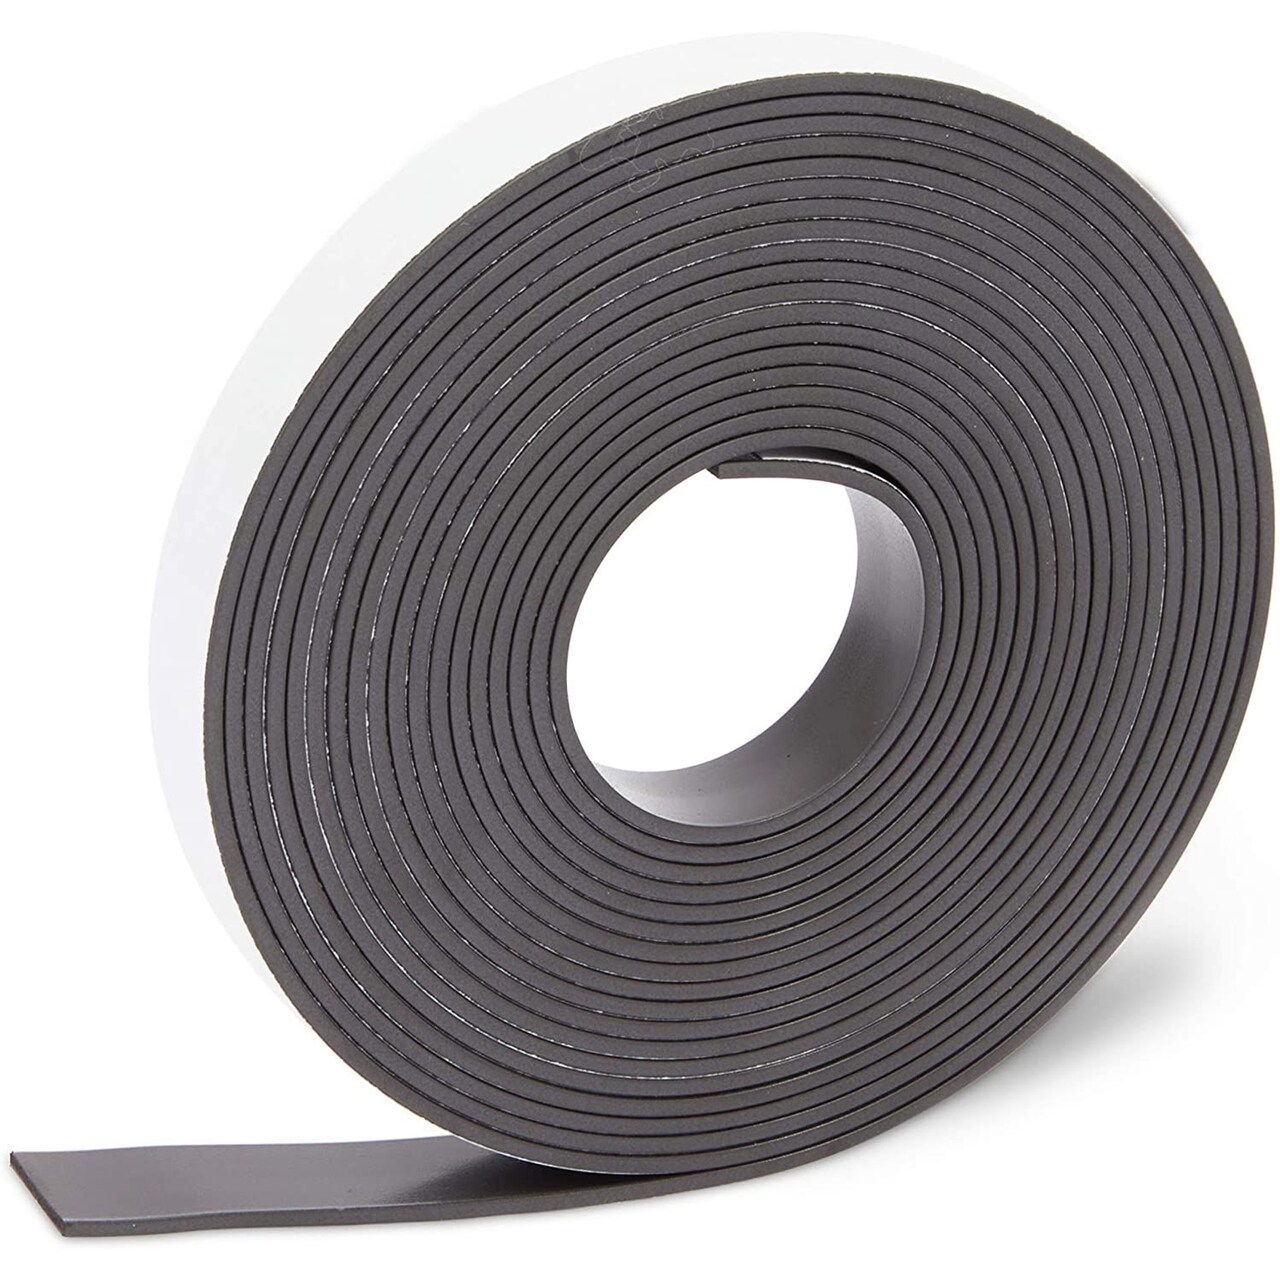 Magnetic Tape Roll with Adhesive Backing (0.5 Inch x 12 Feet, 1 Pack)